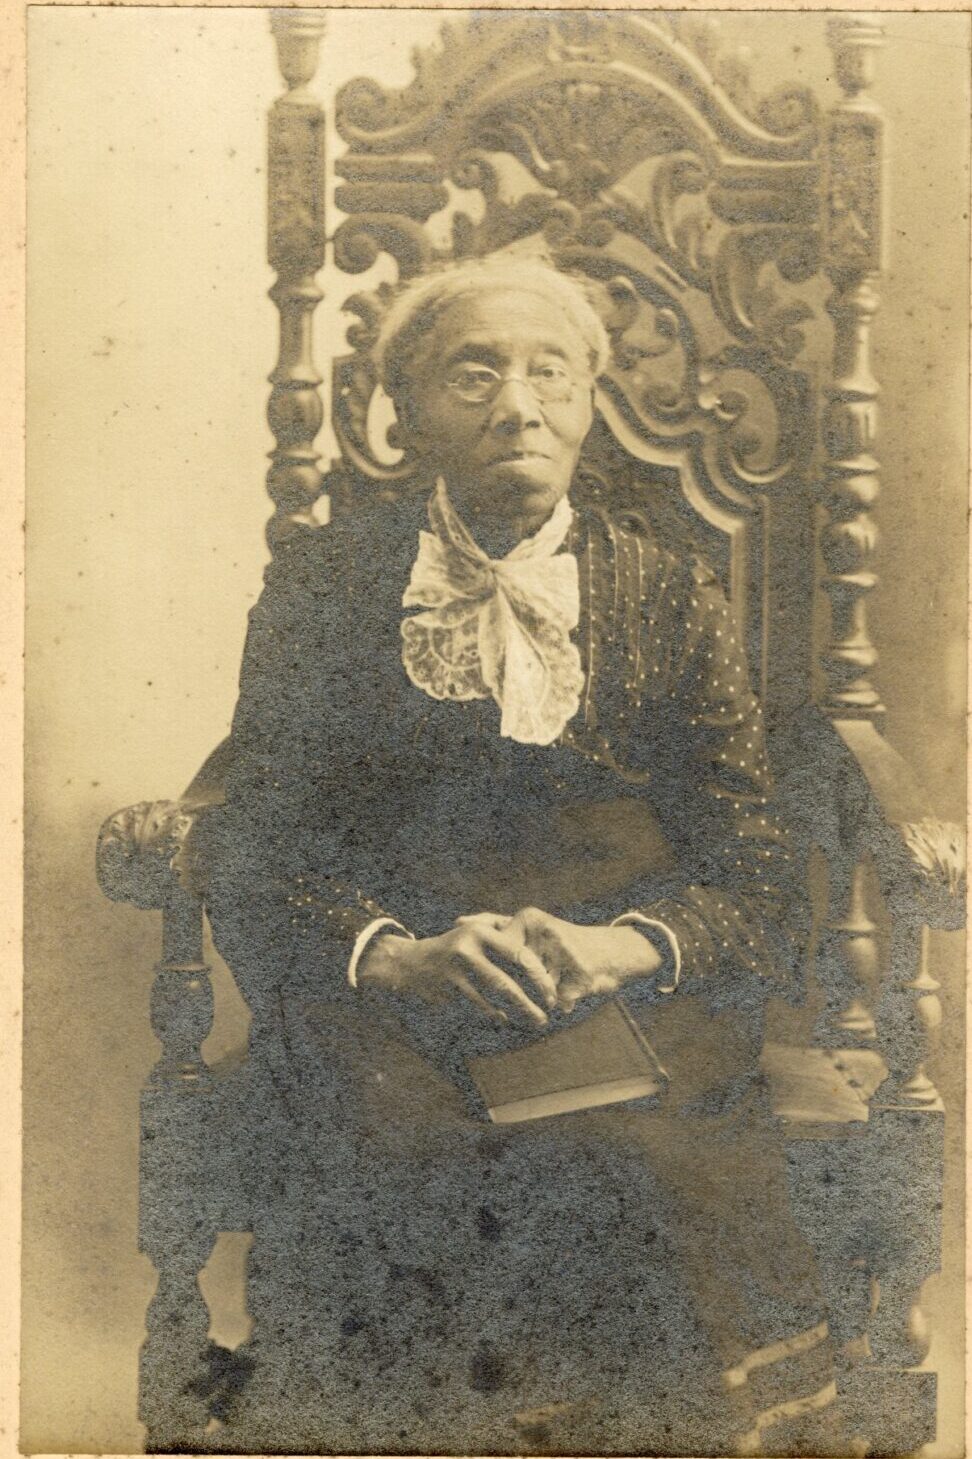 A studio photograph shows an older Black woman sitting in an ornate chair. her hands are folded over a book in her lap.